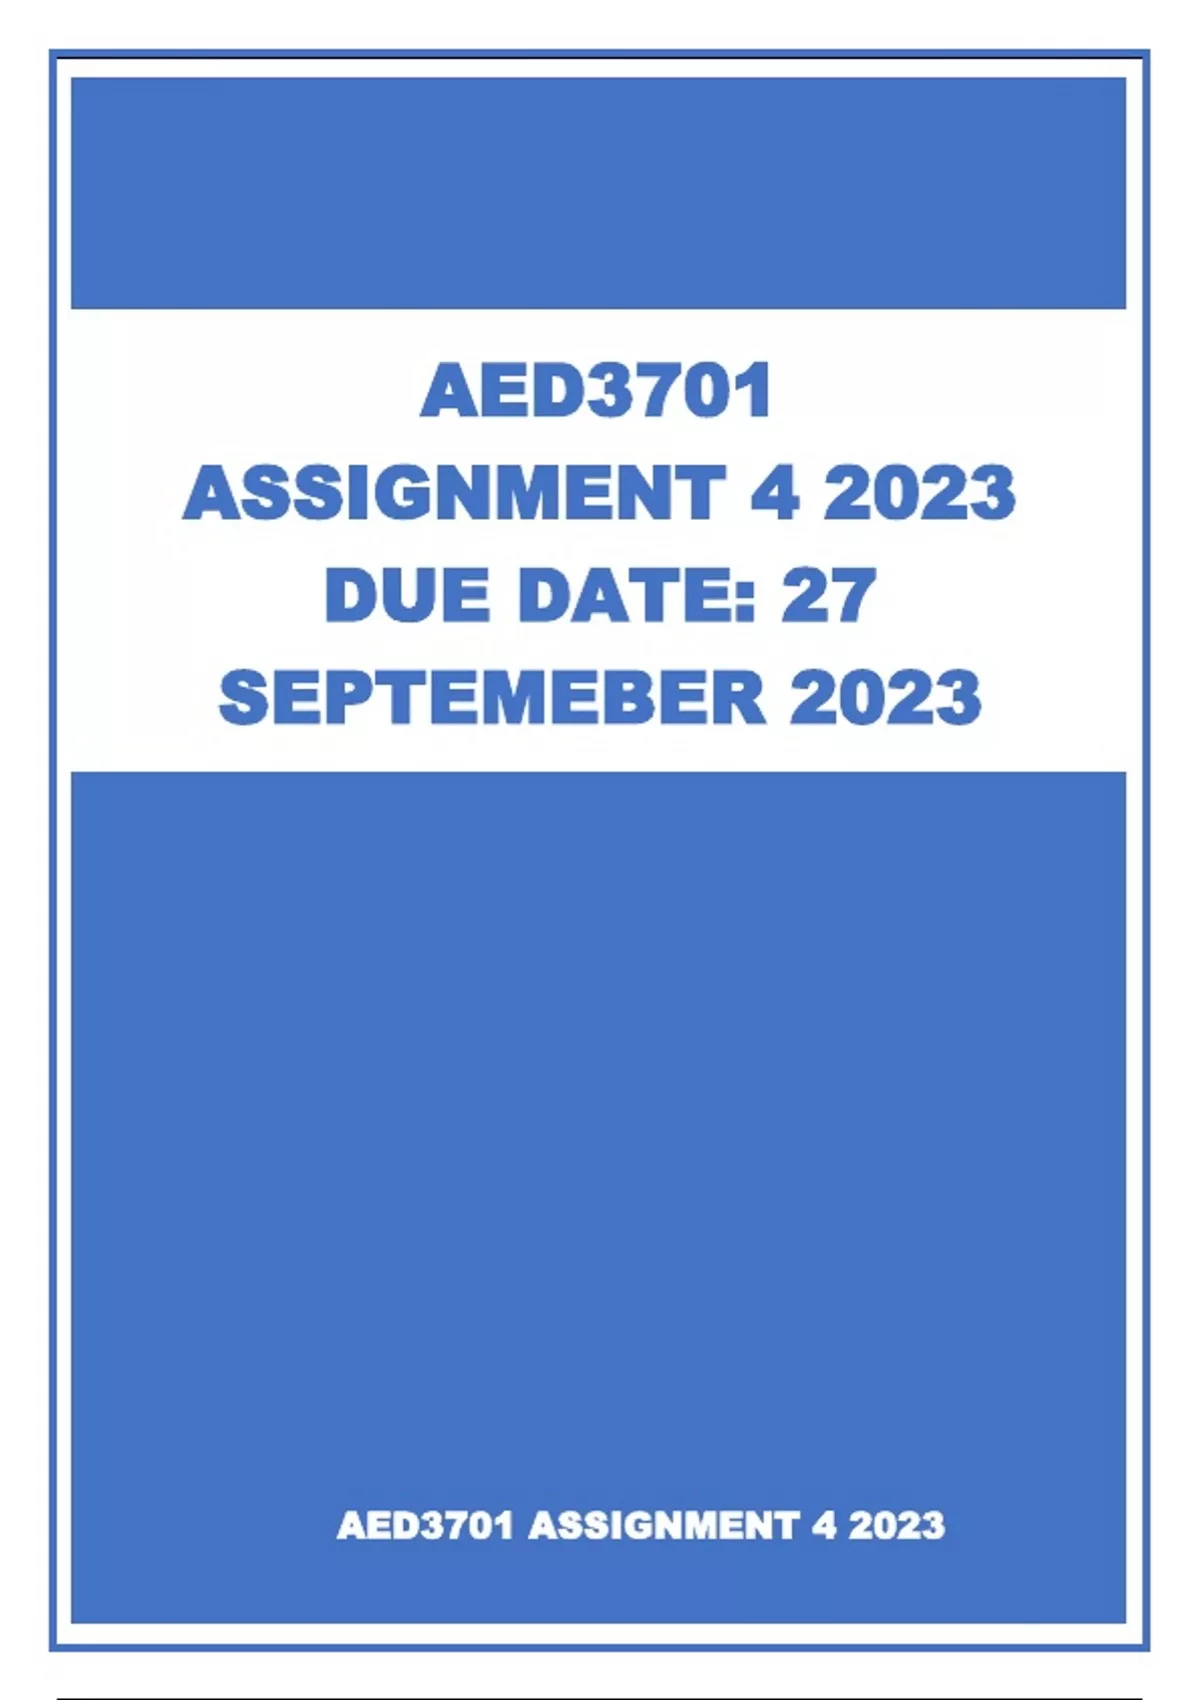 aed3701 assignment 4 answers